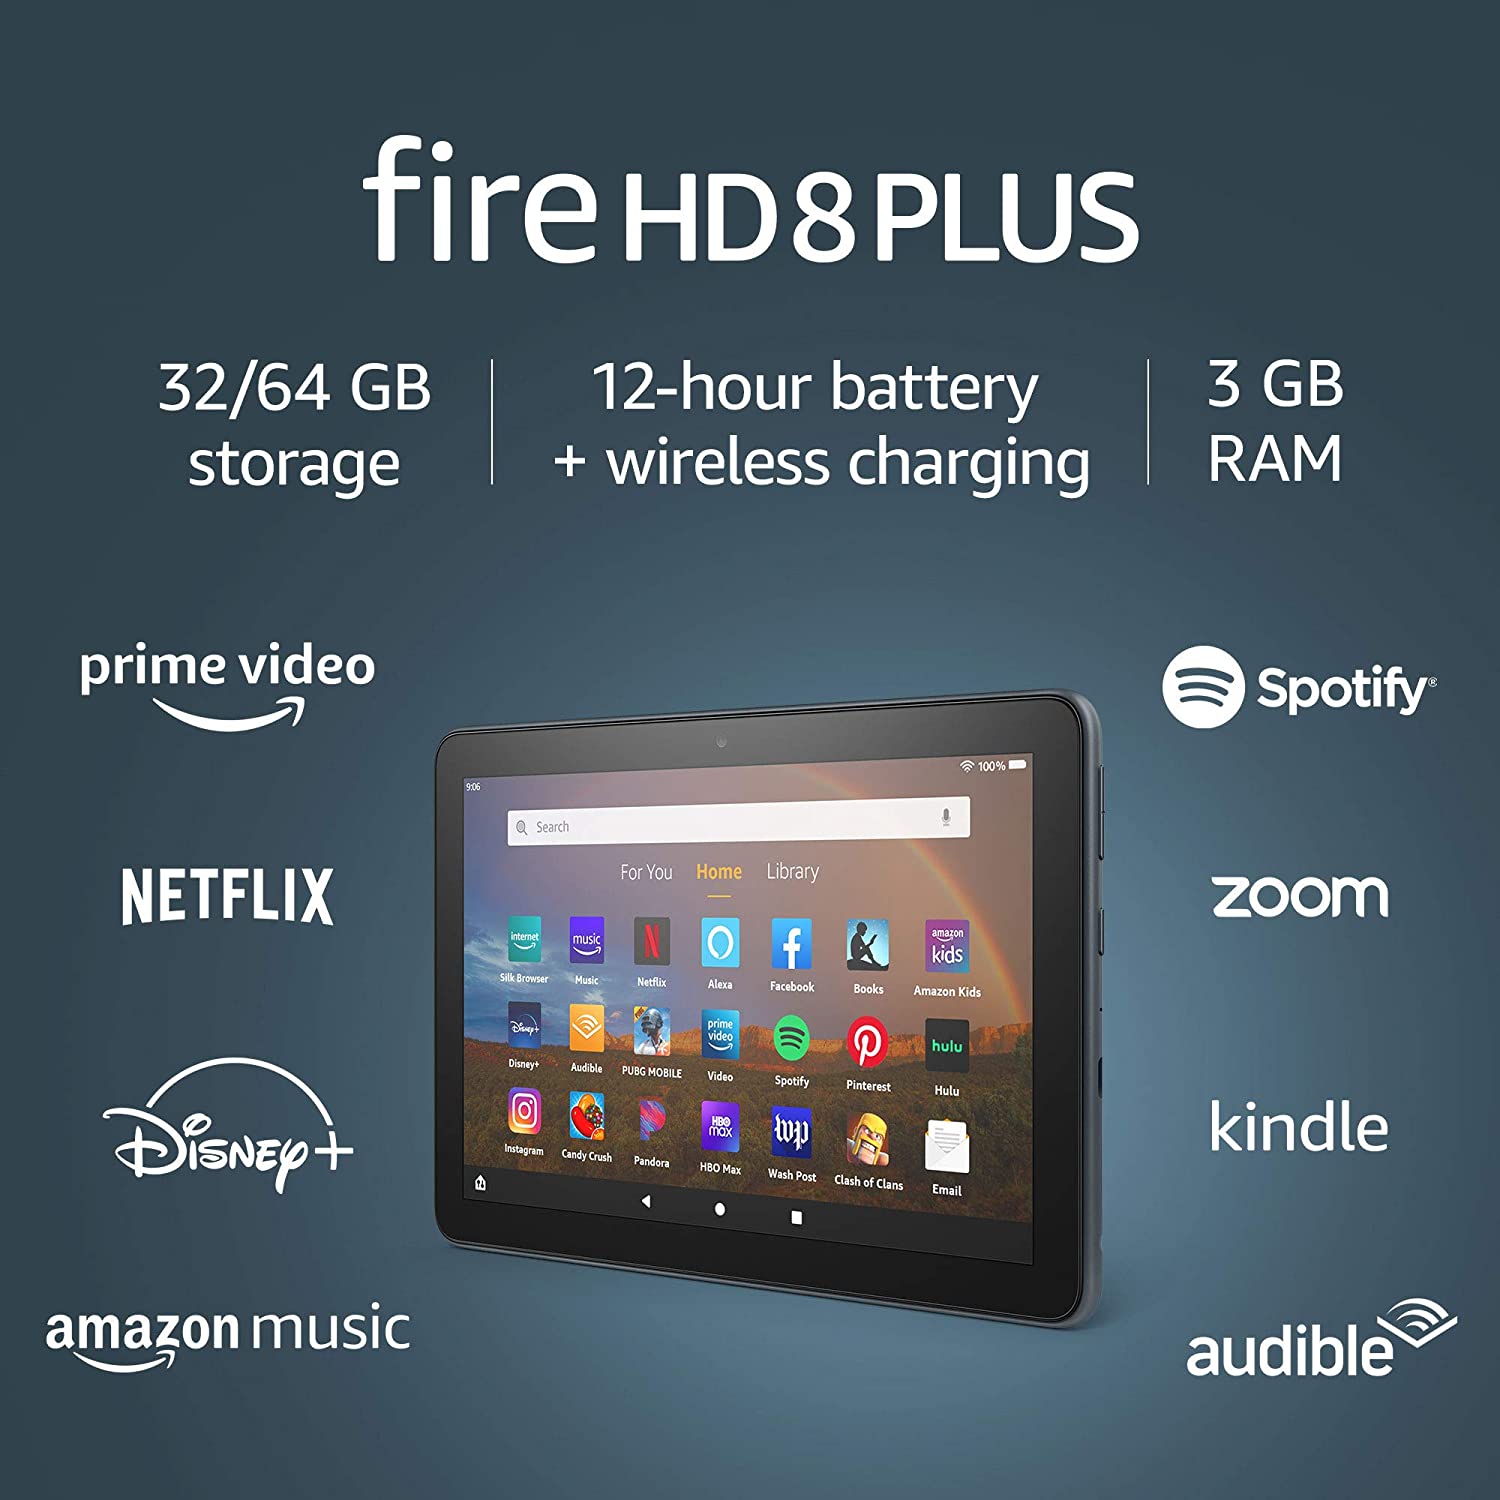 Fire HD 8 Plus features